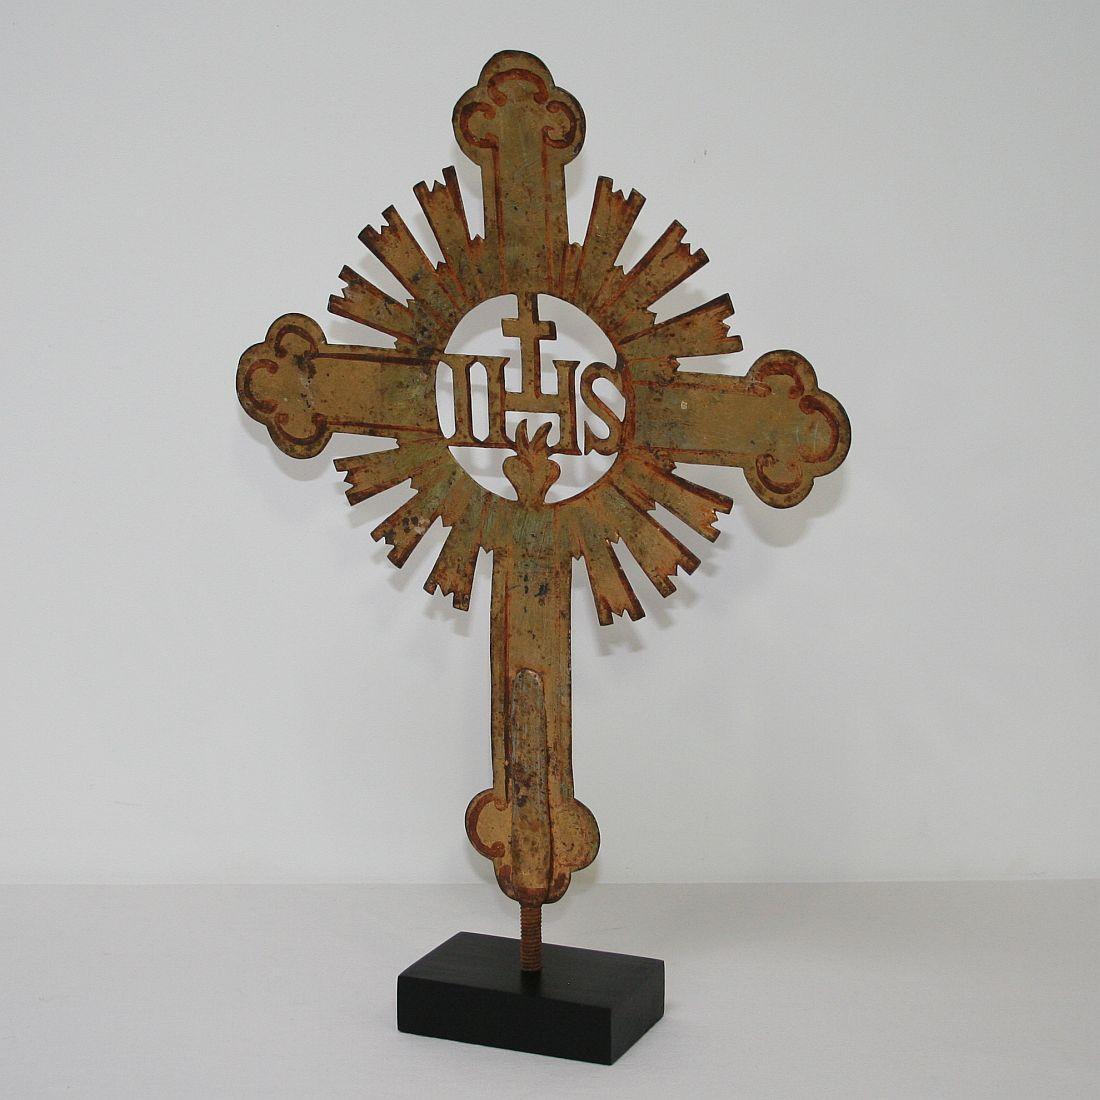 Beautiful processional cross with traces of its gilding.
France, circa 1750
Weathered.
Measurement includes the wooden base.